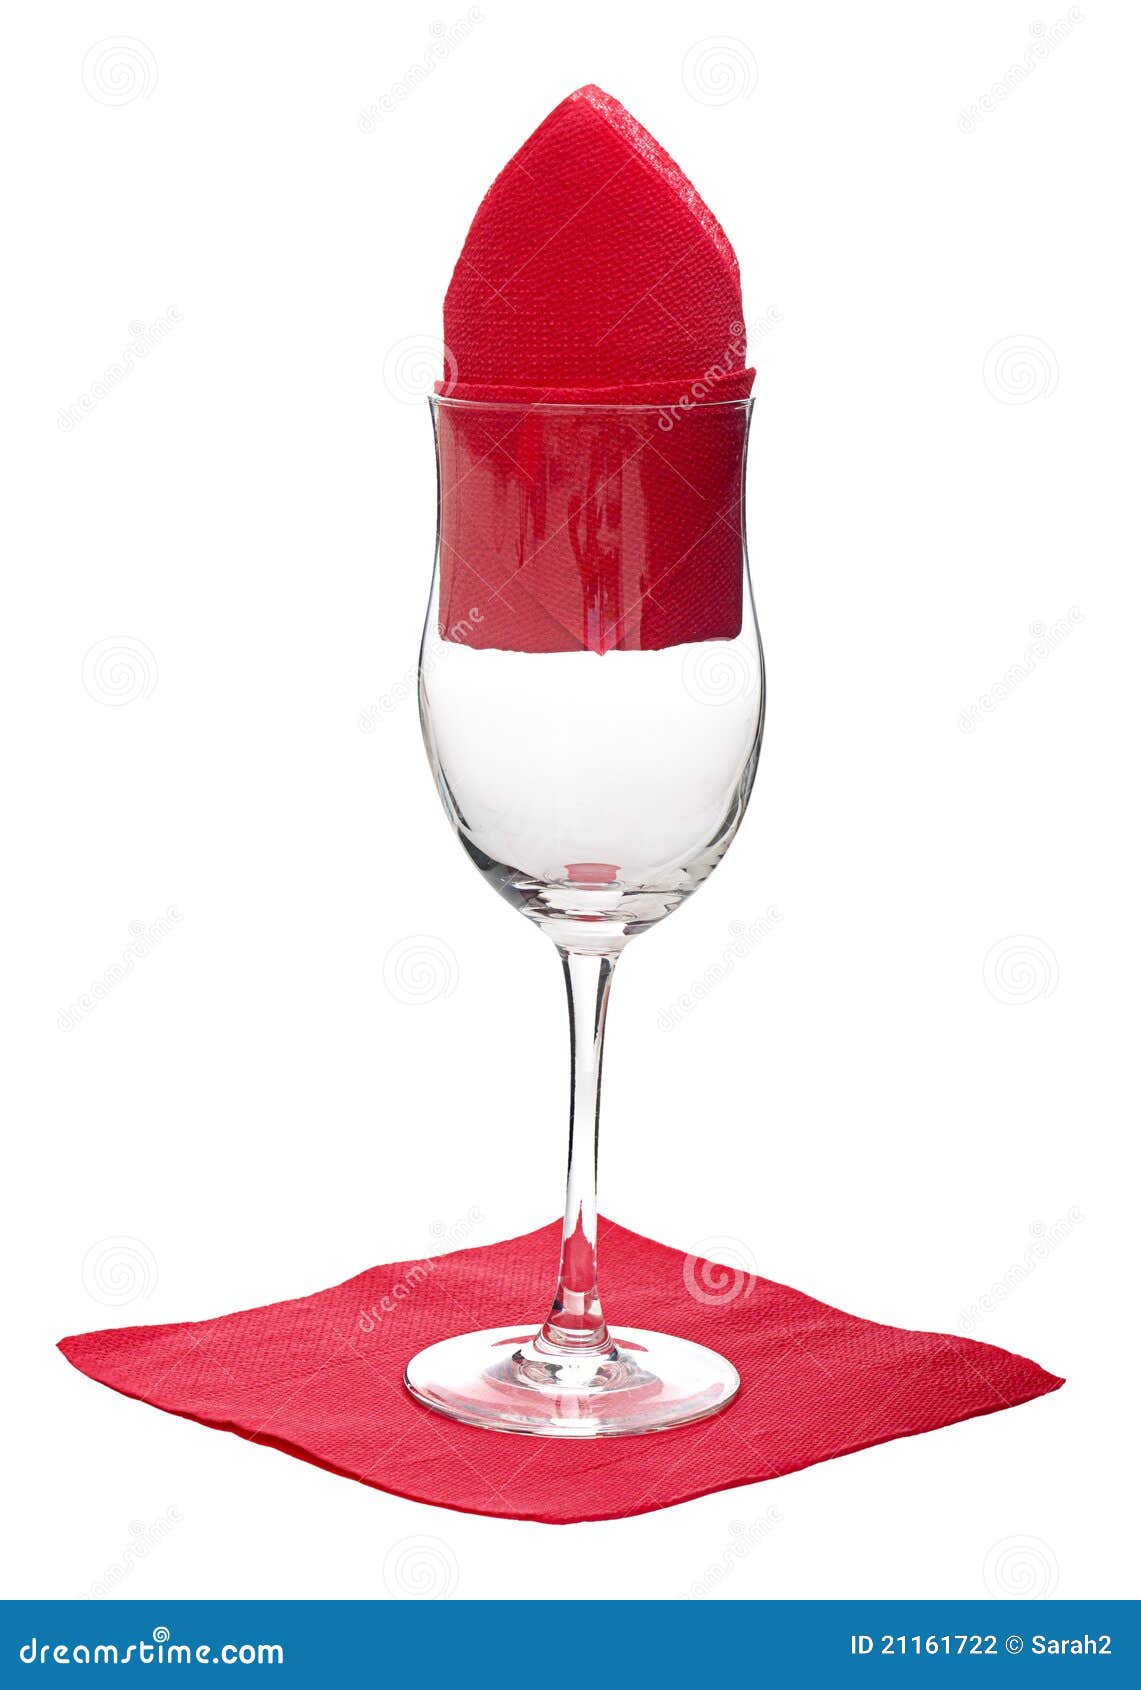 Wine Glass And Red Paper Serviettes, Napkins Stock Photo ...